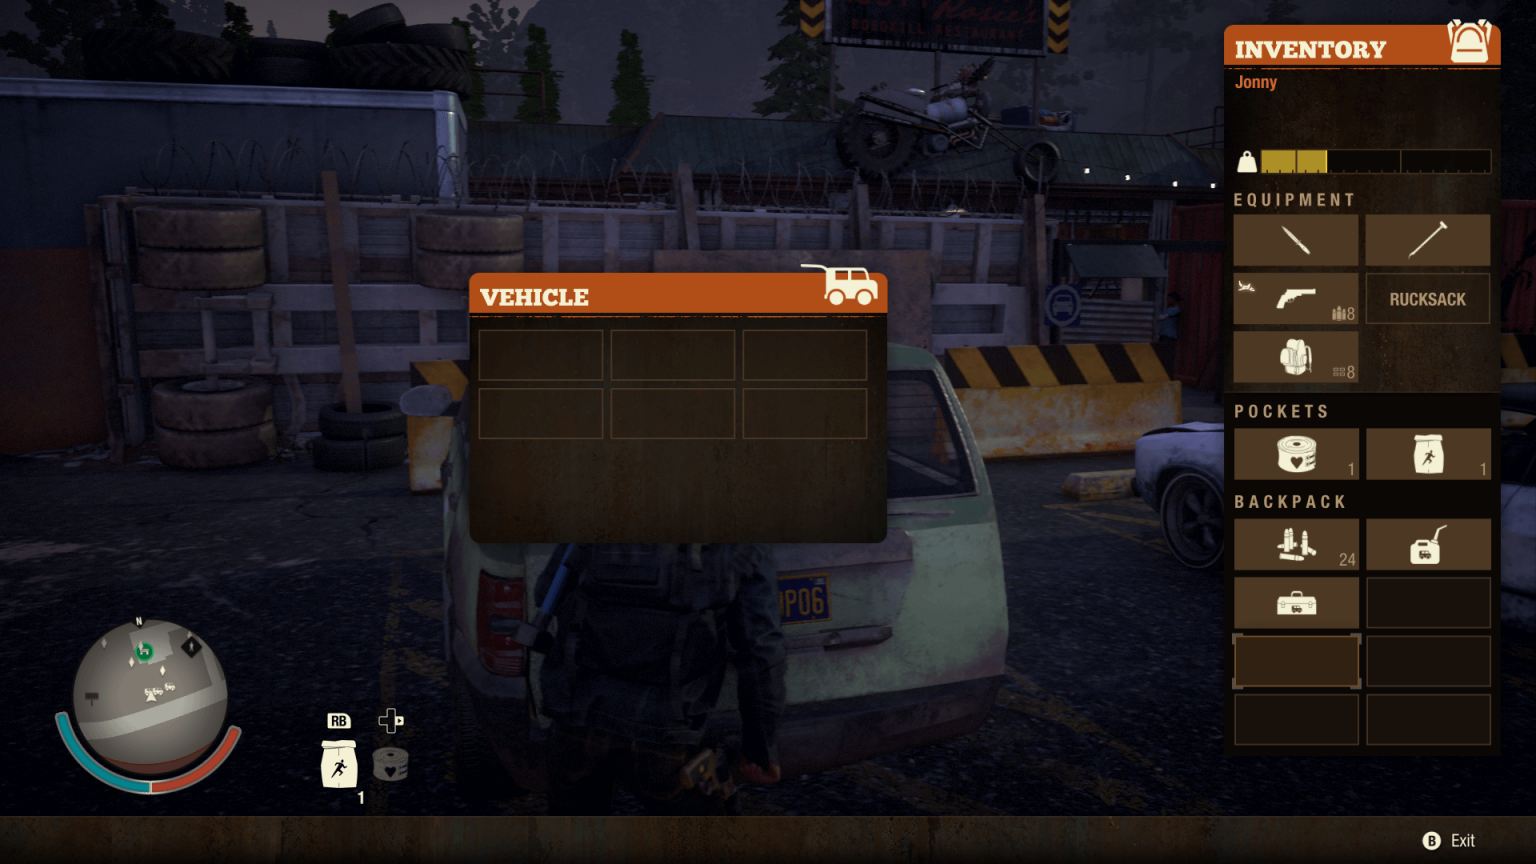 xbox one state of decay 2 mods